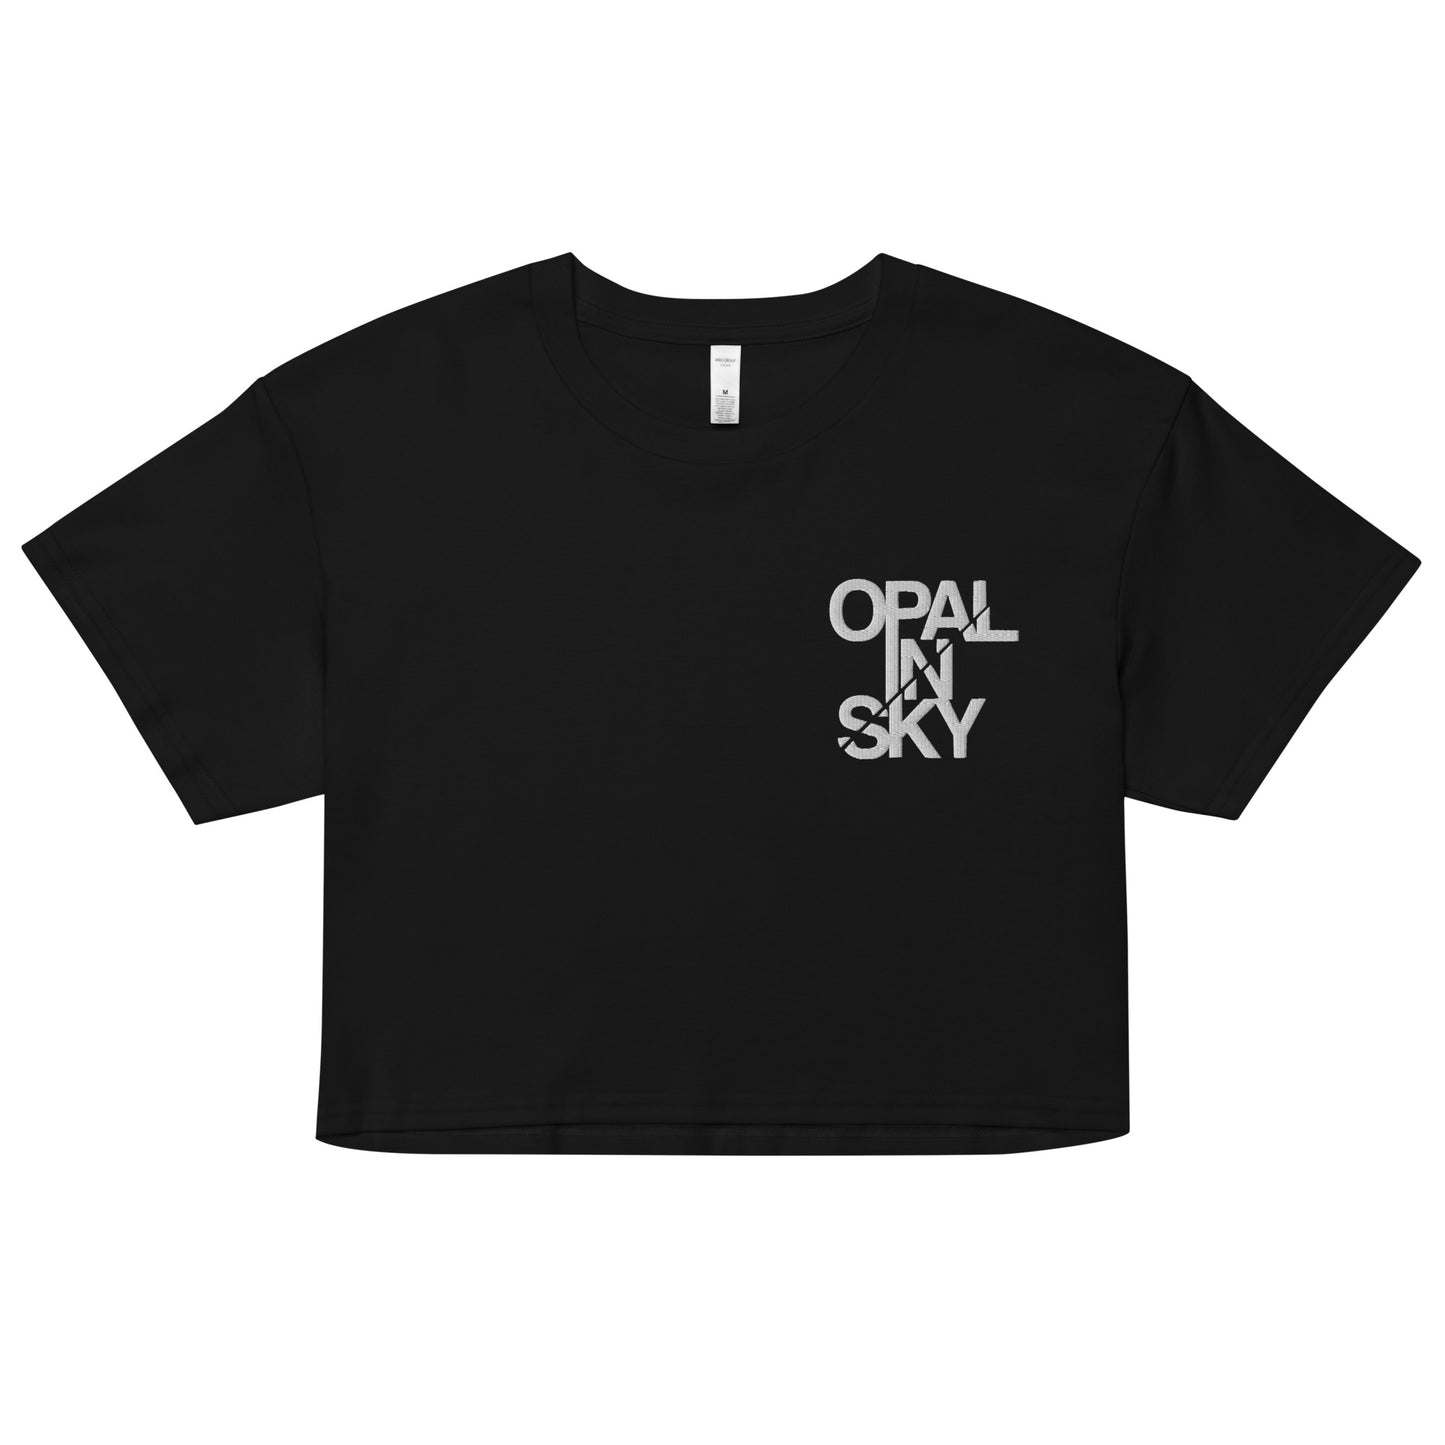 OPAL IN SKY “LOGO” Embroidered Women’s Crop Top